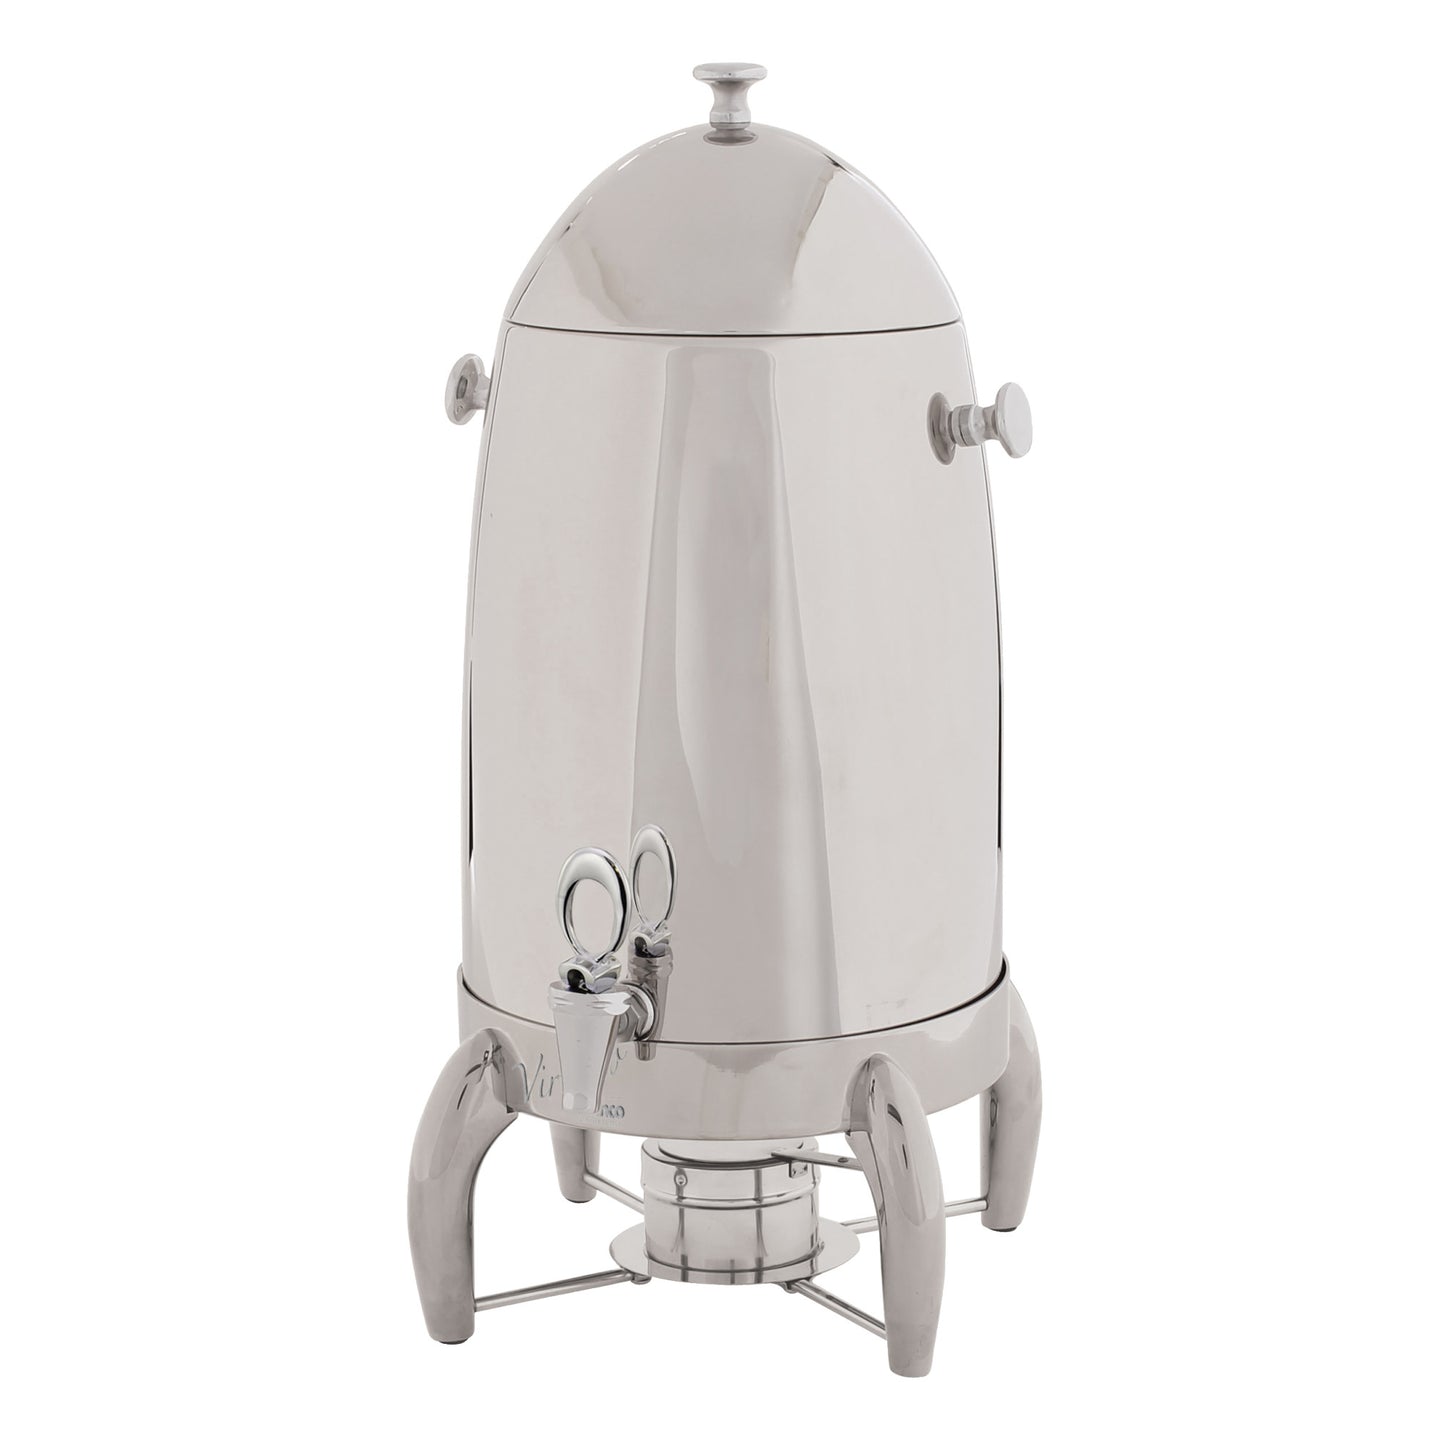 905B - Virtuoso Collection Coffee Urn - 5 Gallons